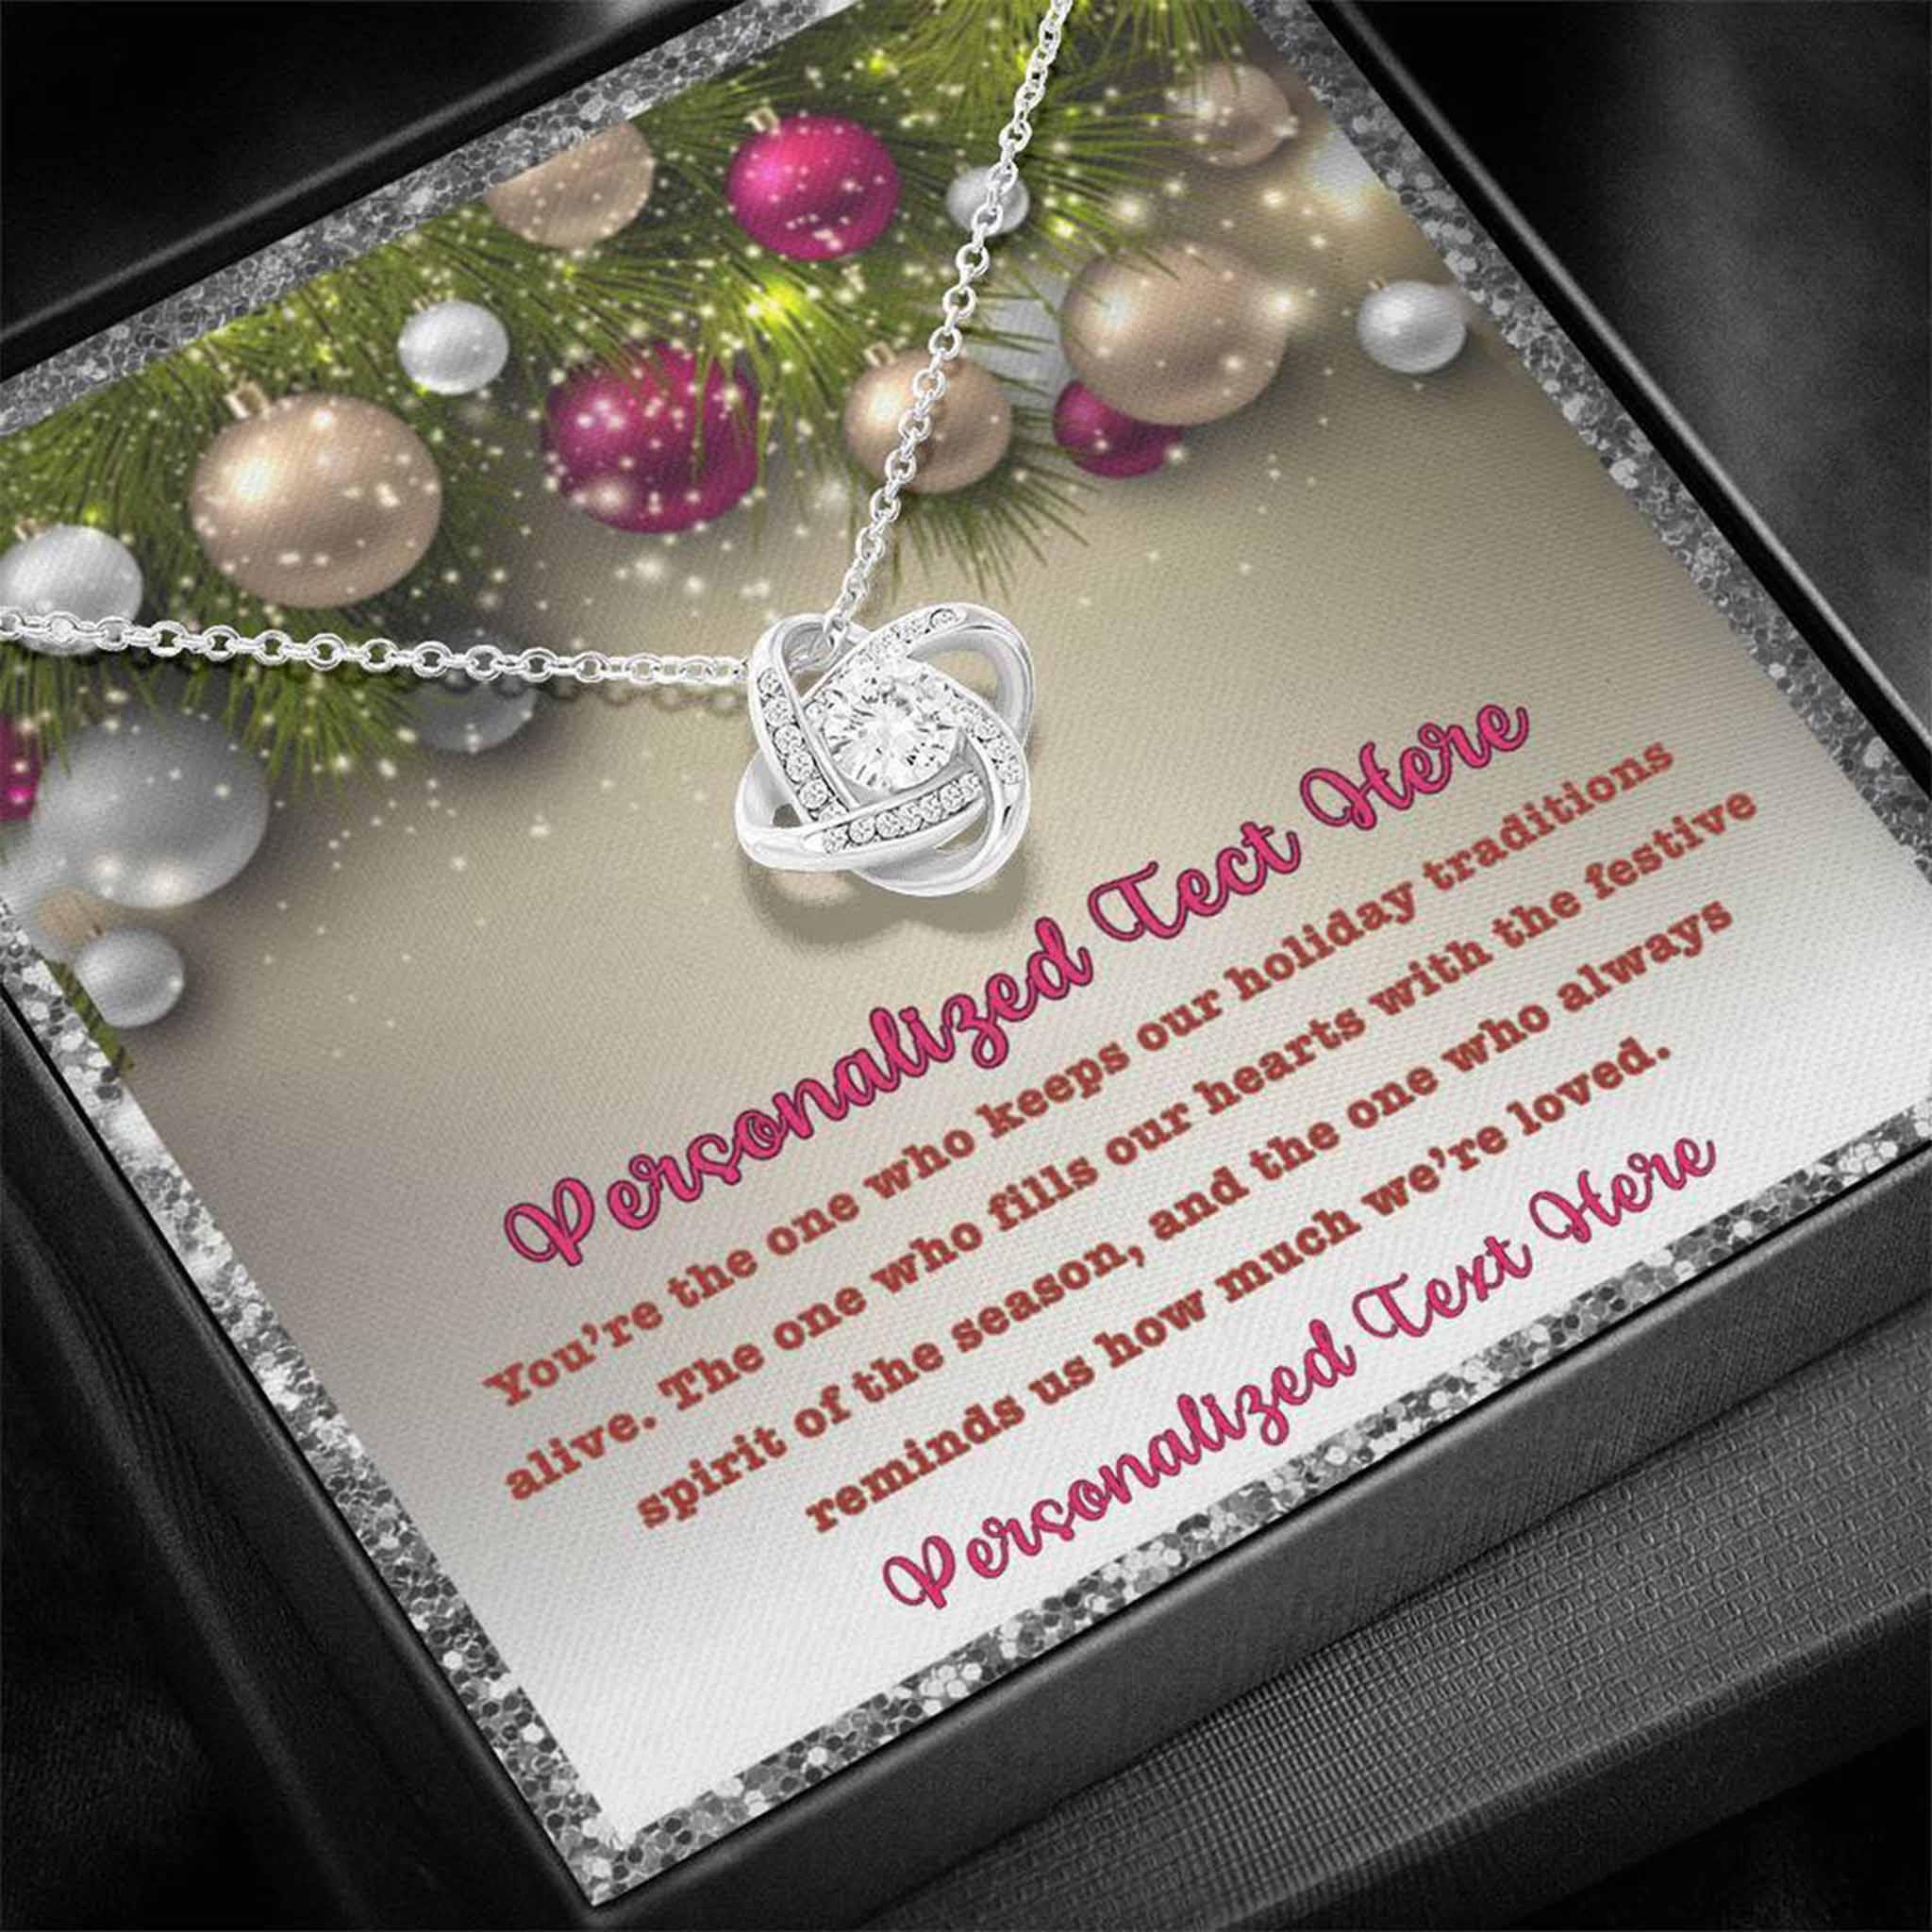 Love Knot Necklace Grandmother Christmas How Much We're Loved Personalized Insert CardCustomly Gifts